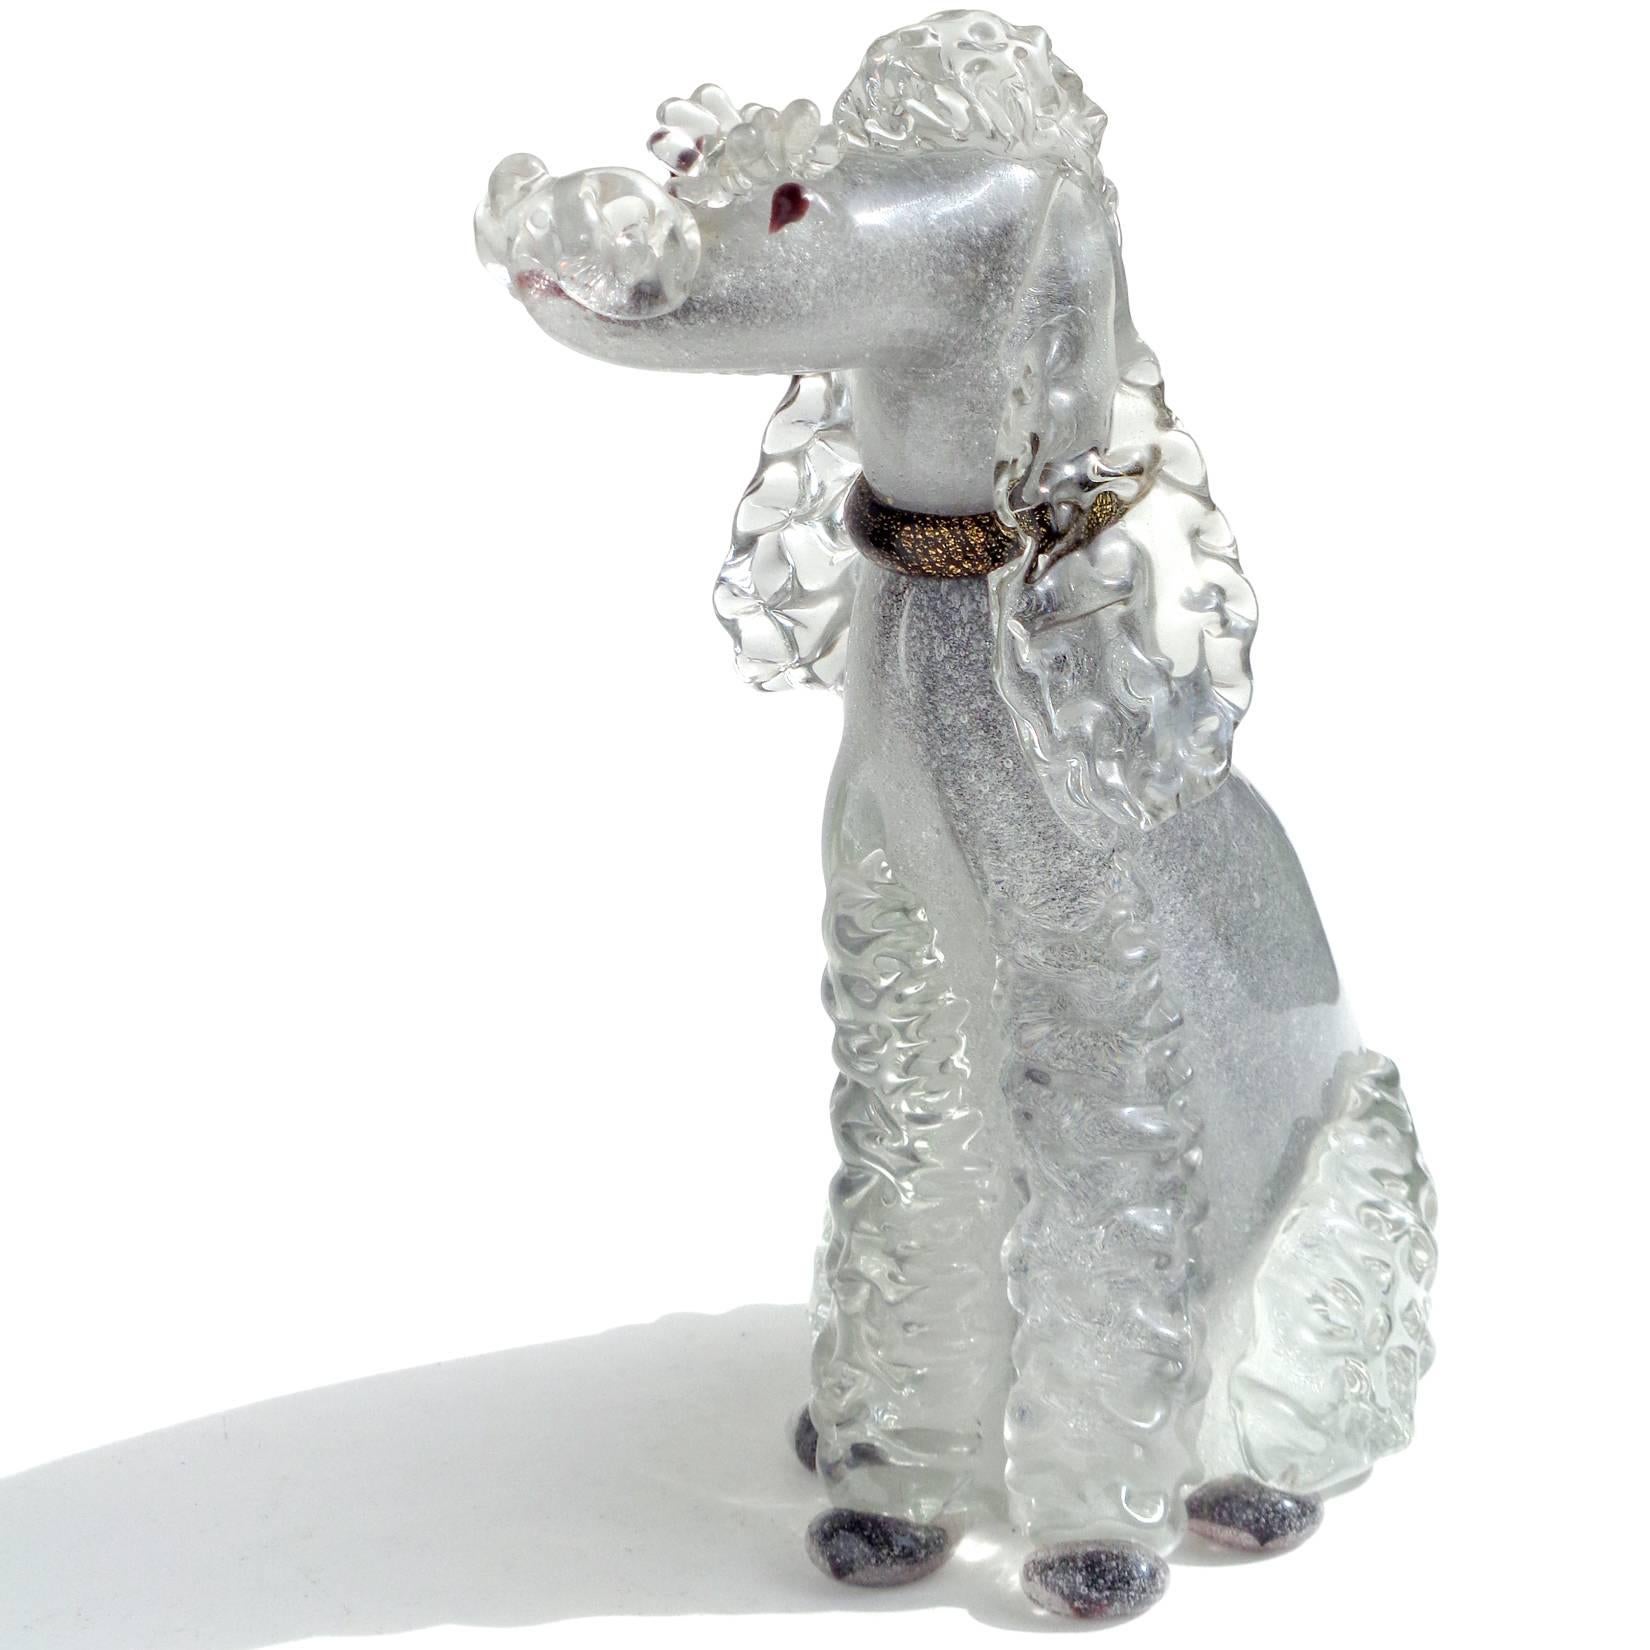 Gorgeous and very rare Murano hand blown Pulegoso bubbles, black and gold Italian art glass poodle puppy dog sculpture. Documented to designer Alfredo Barbini, circa 1950s-1960s and published in his catalog. Highly detailed, even with eyelashes over